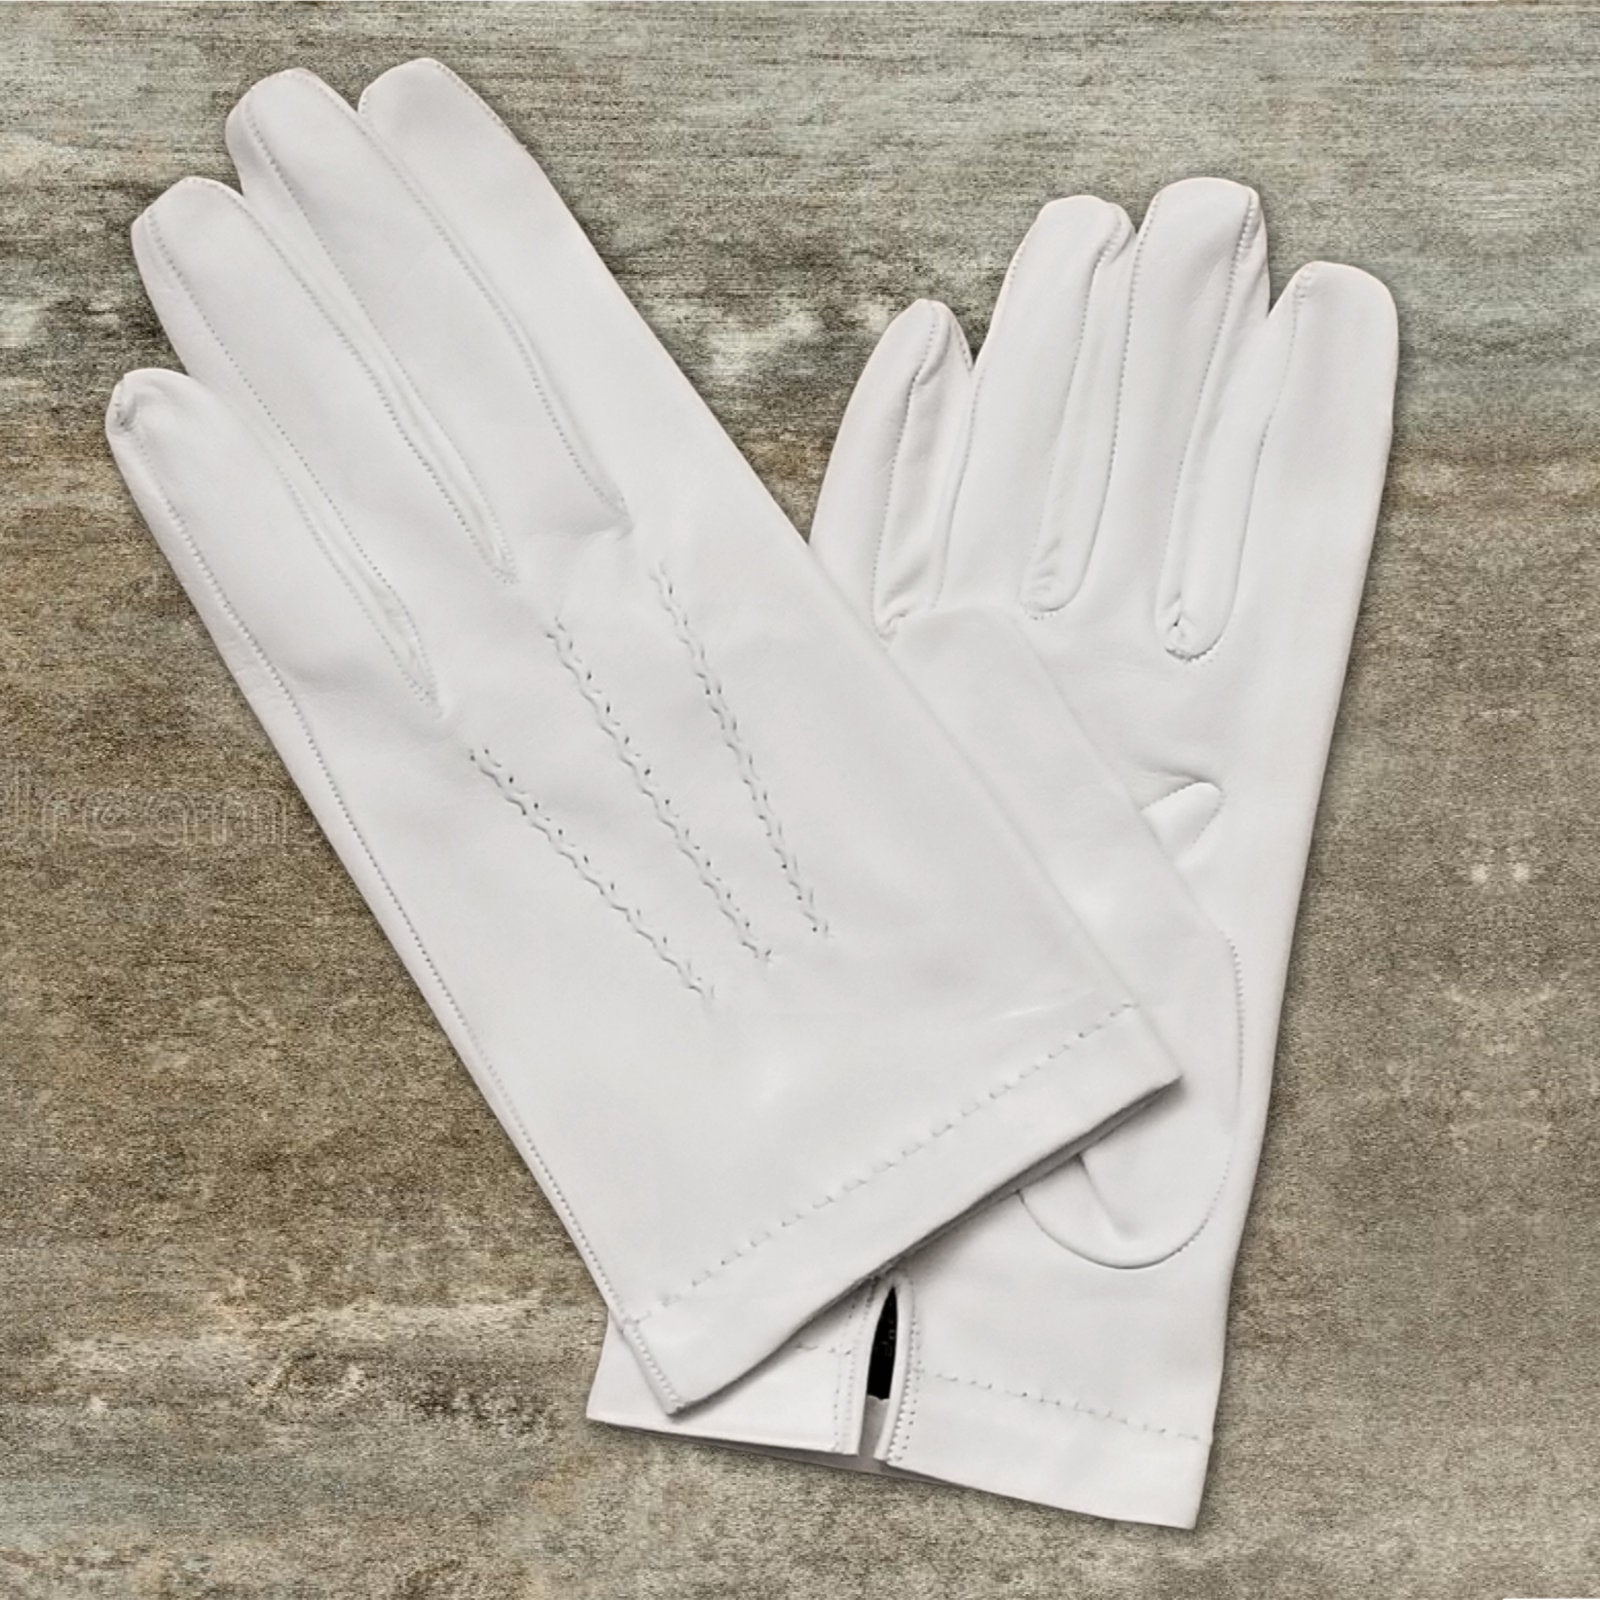 White Men's Evening White Tie Leather Gloves Unlined by Fort Belvedere